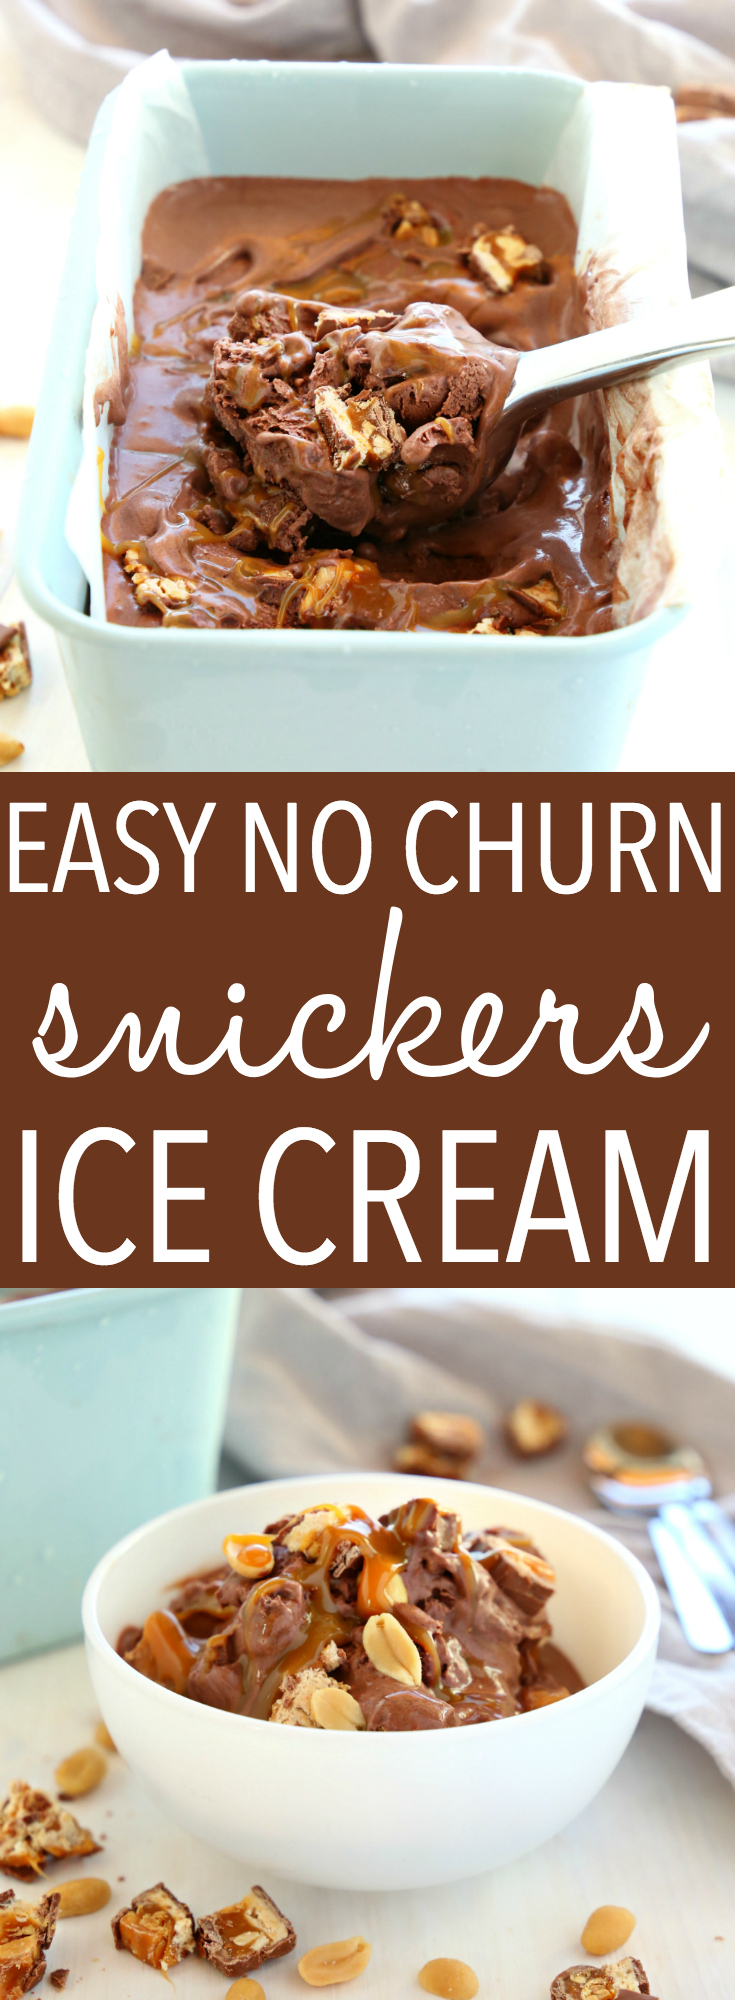 This Easy No Churn Snickers Ice Cream is the perfect cool treat for Snickers lovers! It's SO easy to make with only a few simple ingredients and it's the perfect ice cream for summer! Recipe from thebusybaker.ca! #nochurn #icecream #homemade #summer #treat #kidfriendly #snickers #dessert #homemadeicecream #easyicecream via @busybakerblog